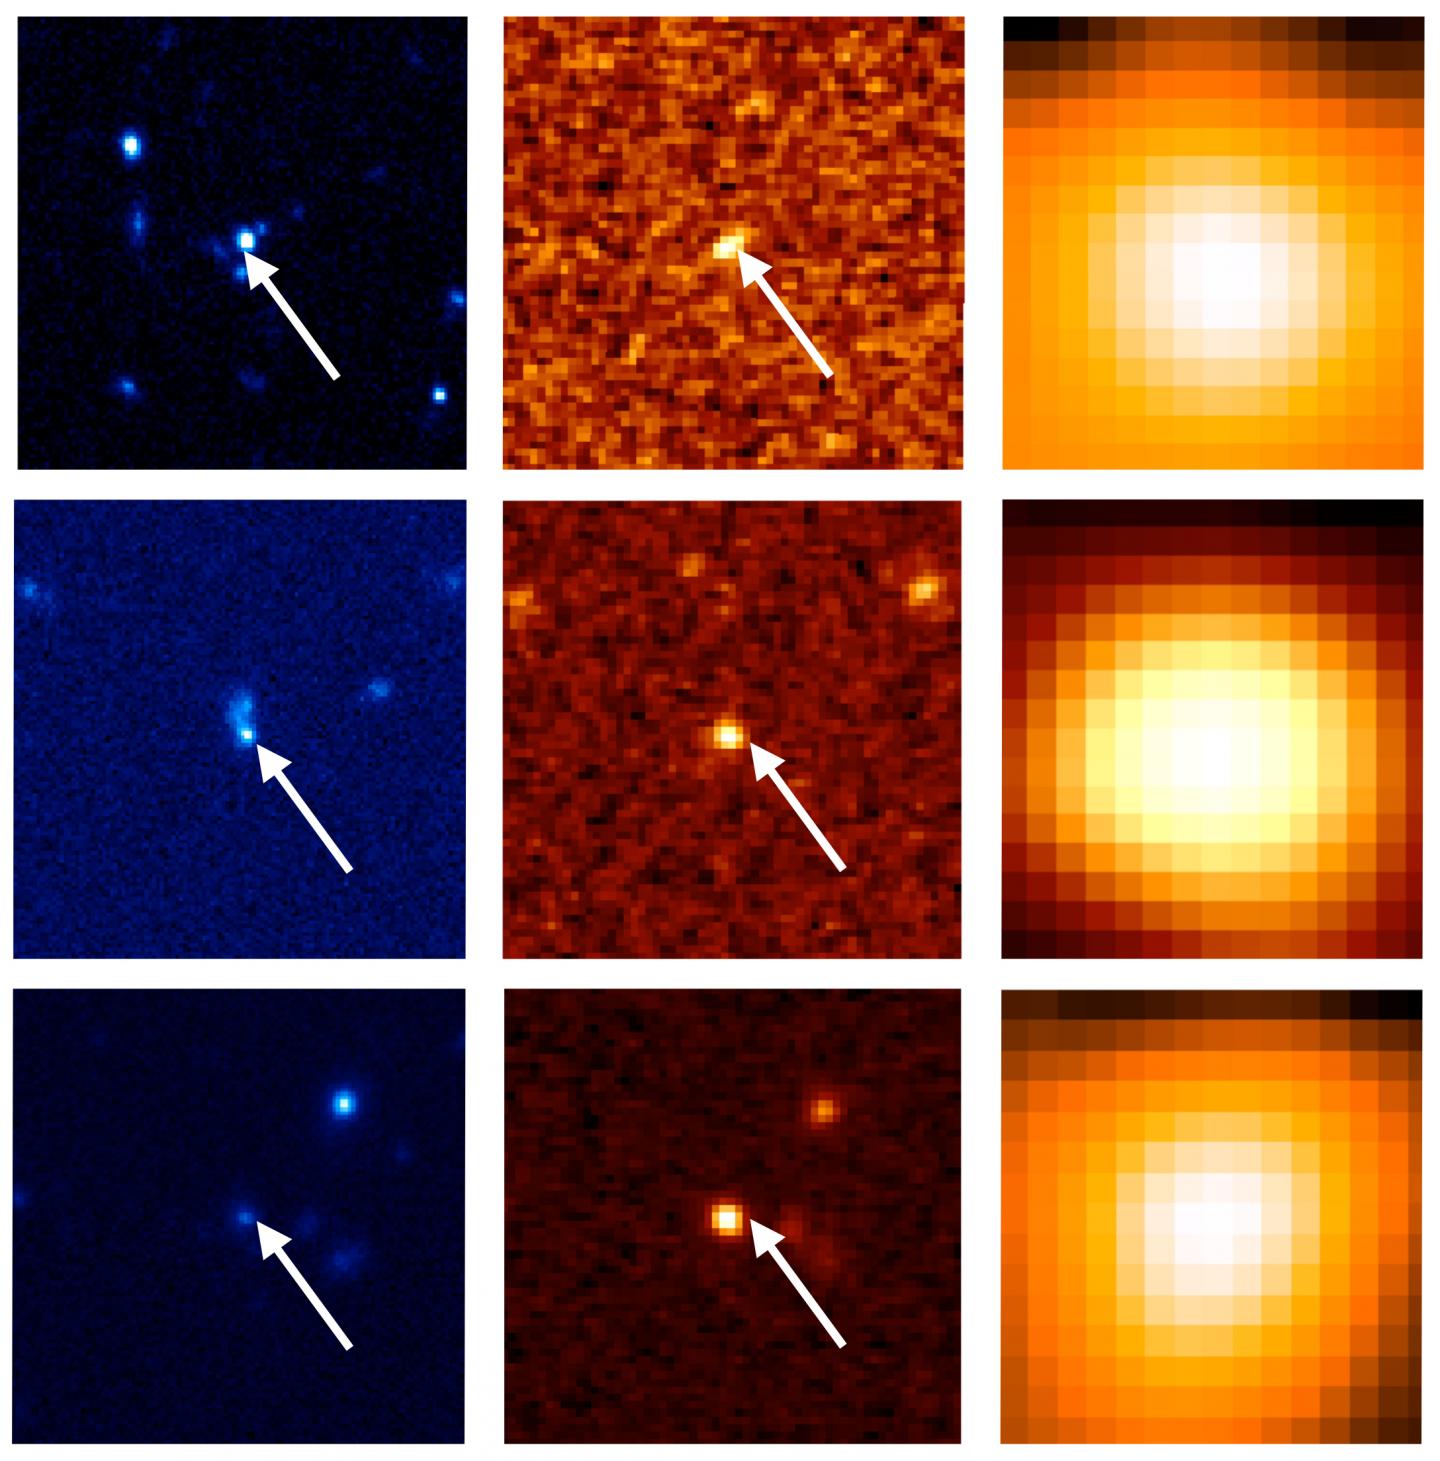 Images of 3 Dust Obscured Galaxies in Optical, Near-Infrared, and Mid-Infrared Light